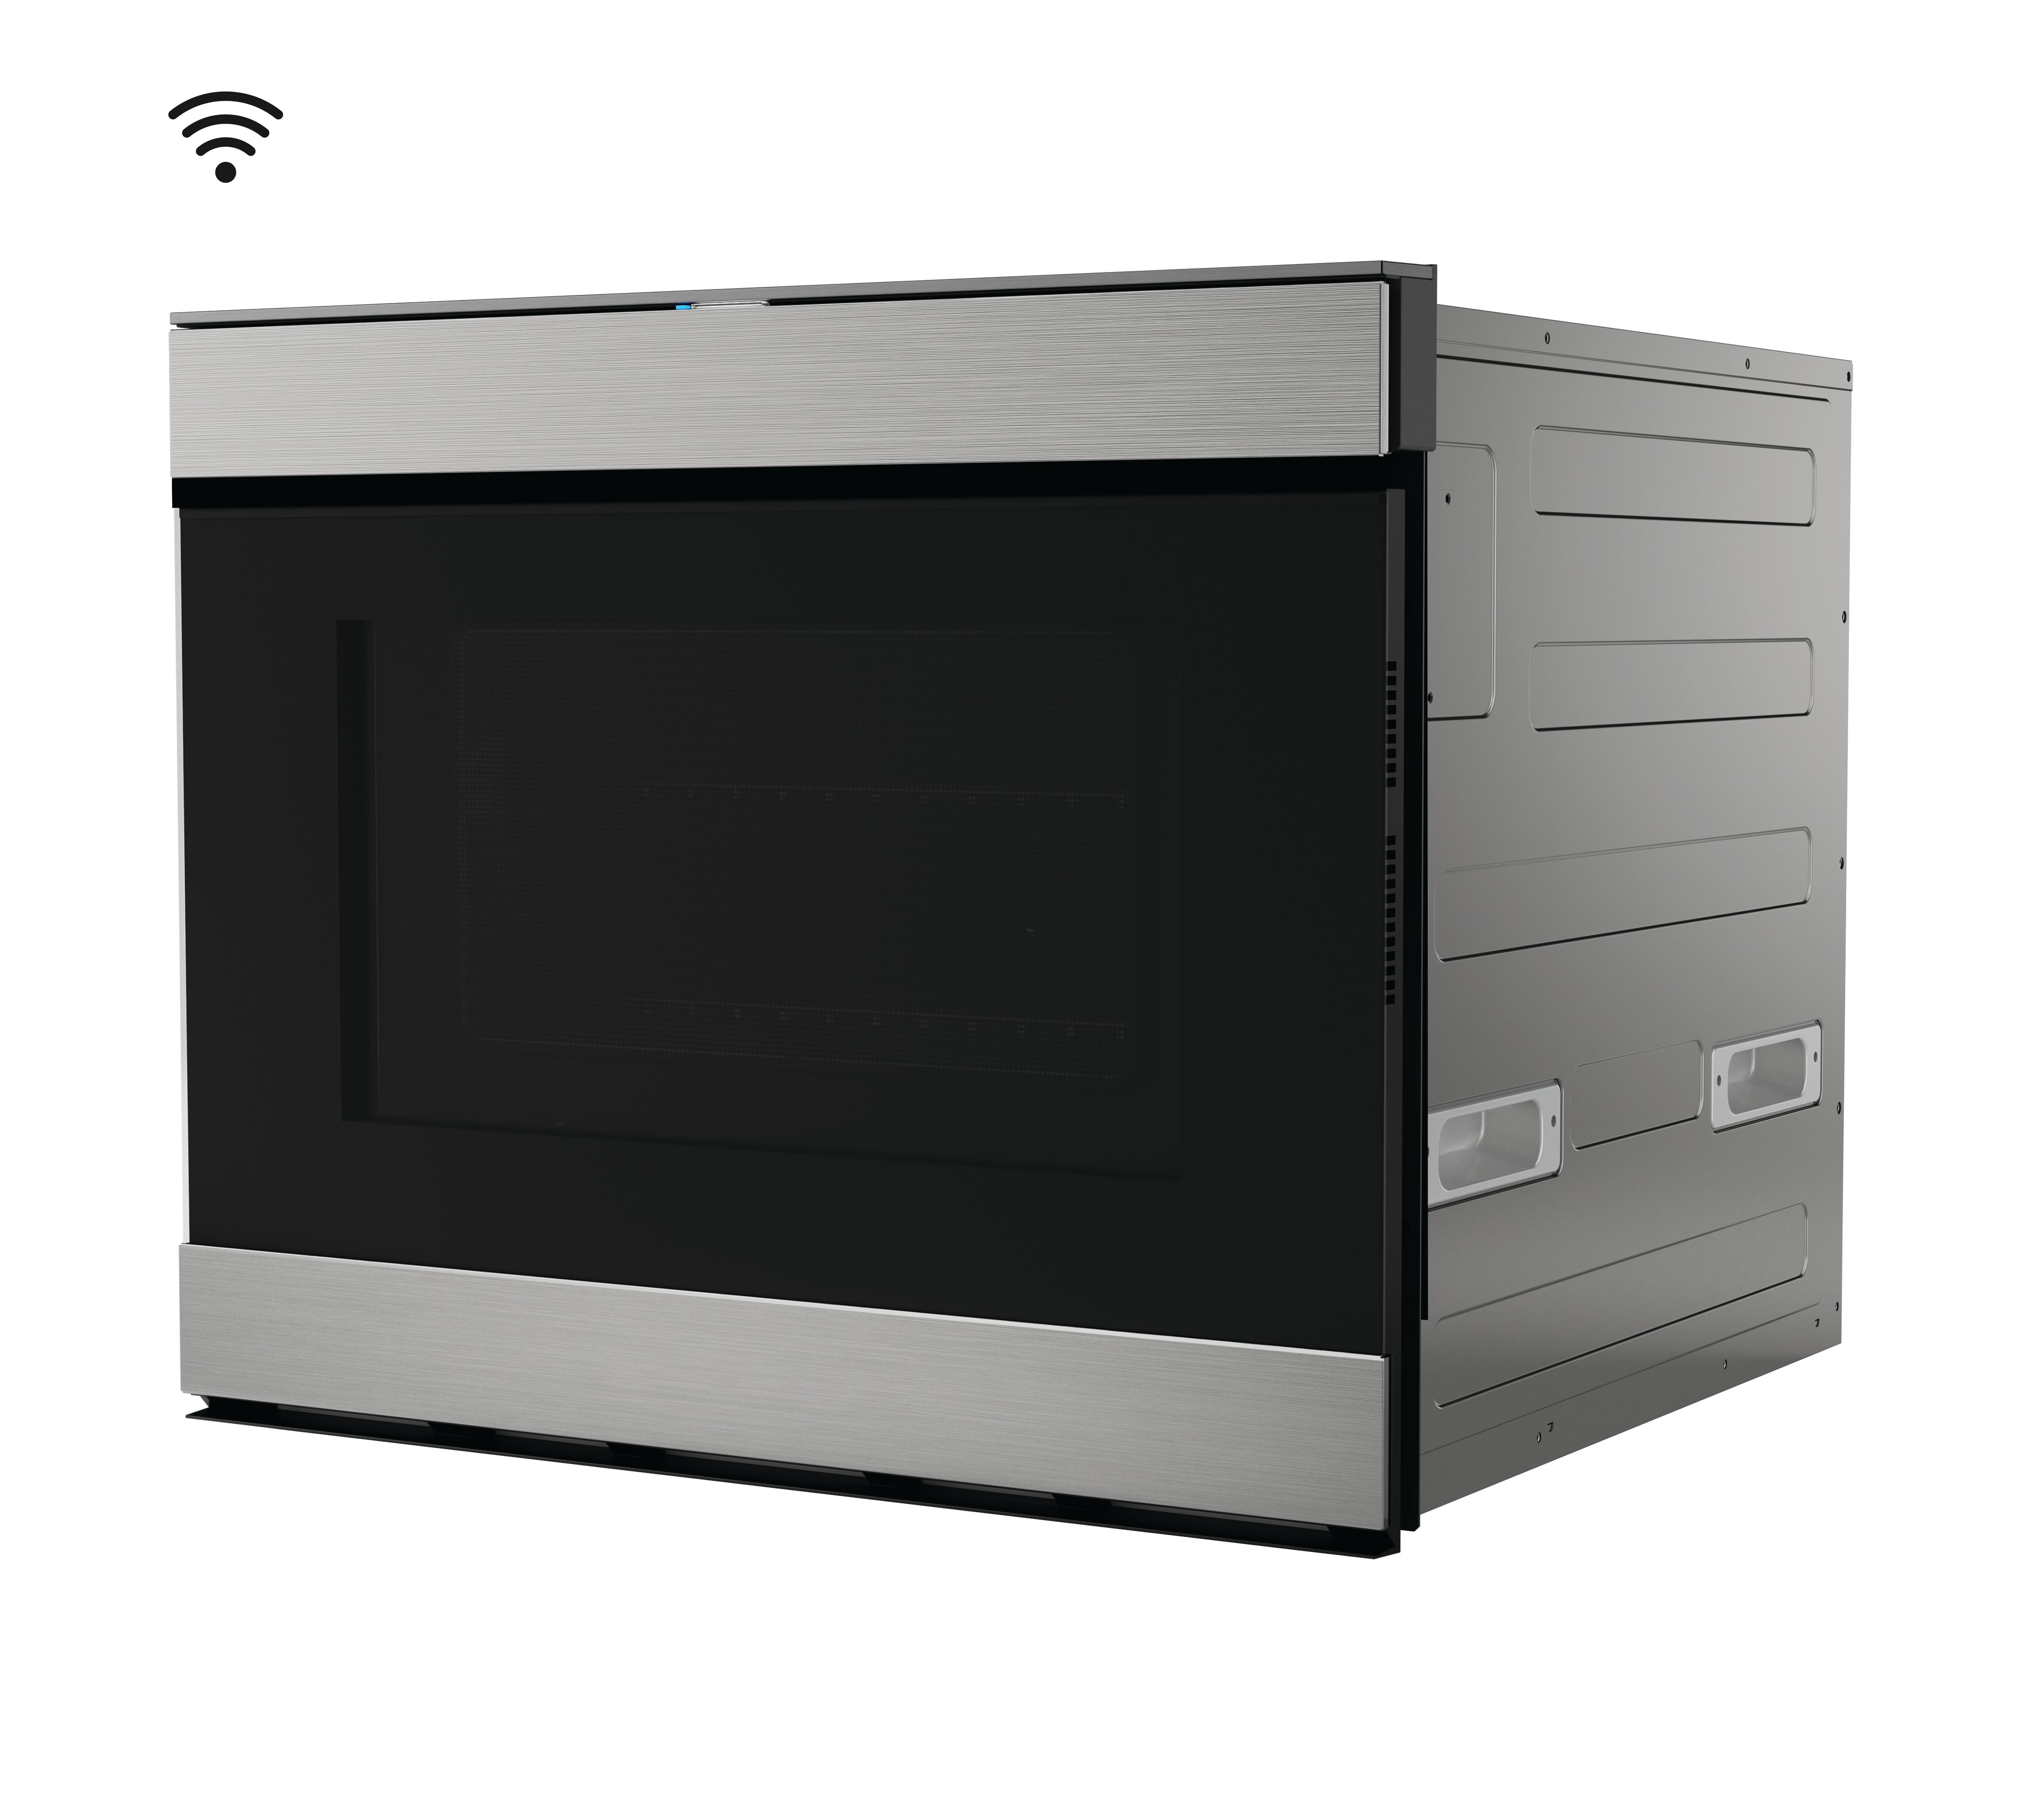 Sharp - 1.4 cu. Ft  Built In Microwave in Stainless - SMD2499FSC